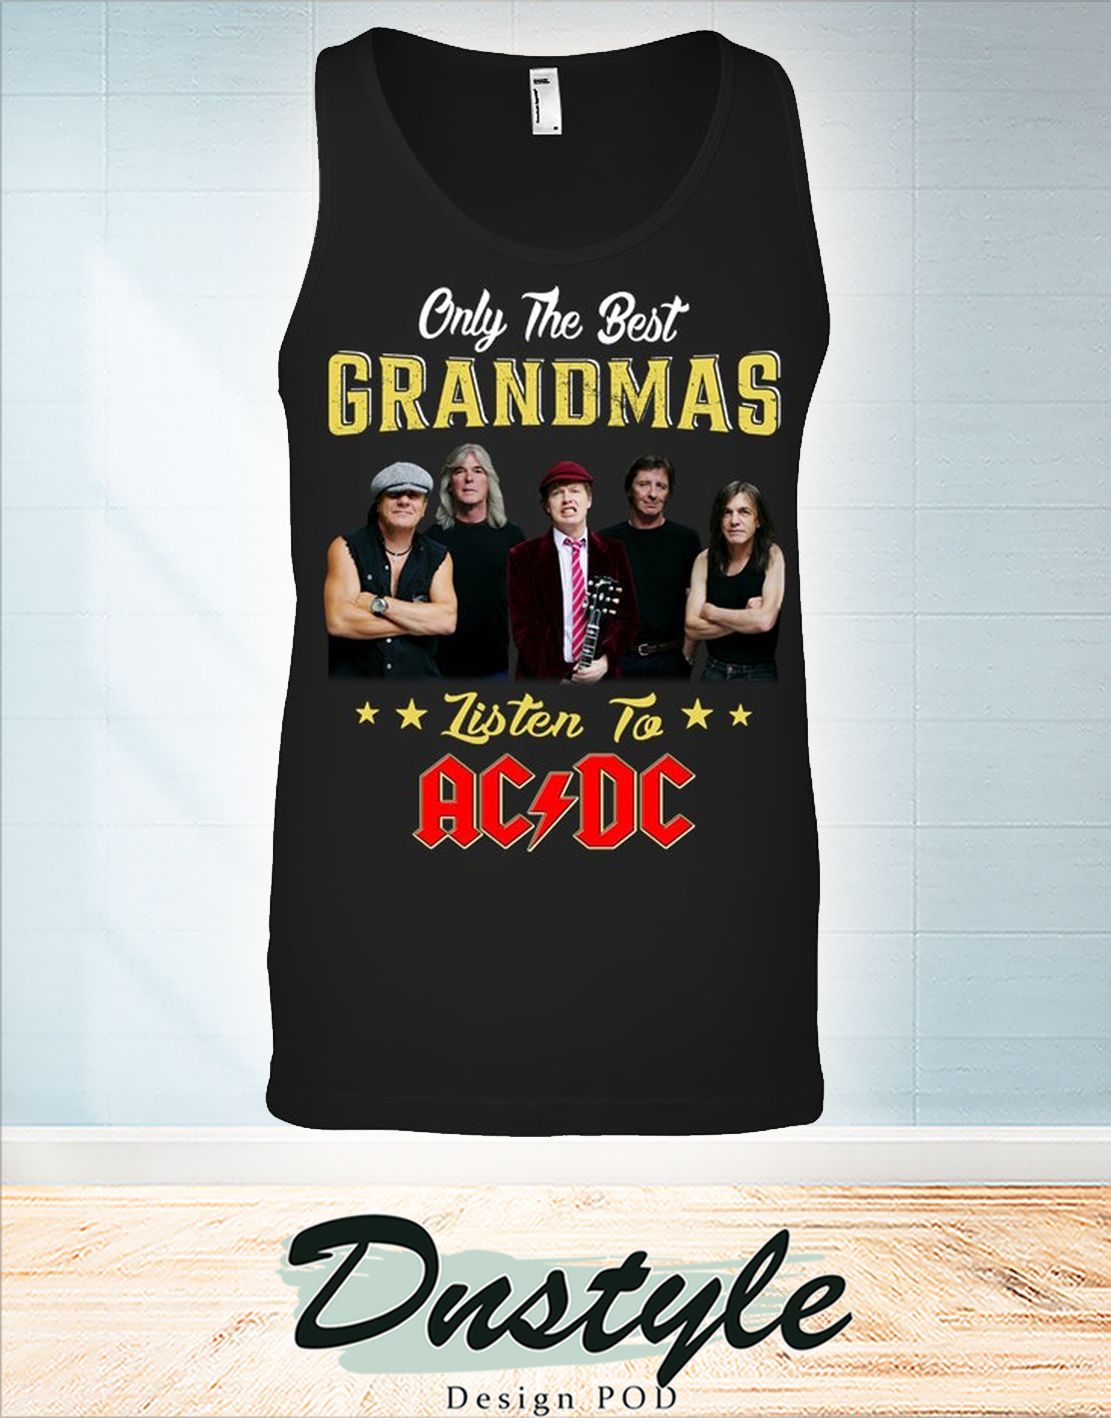 Only the best grandmas listen to ACDC tank